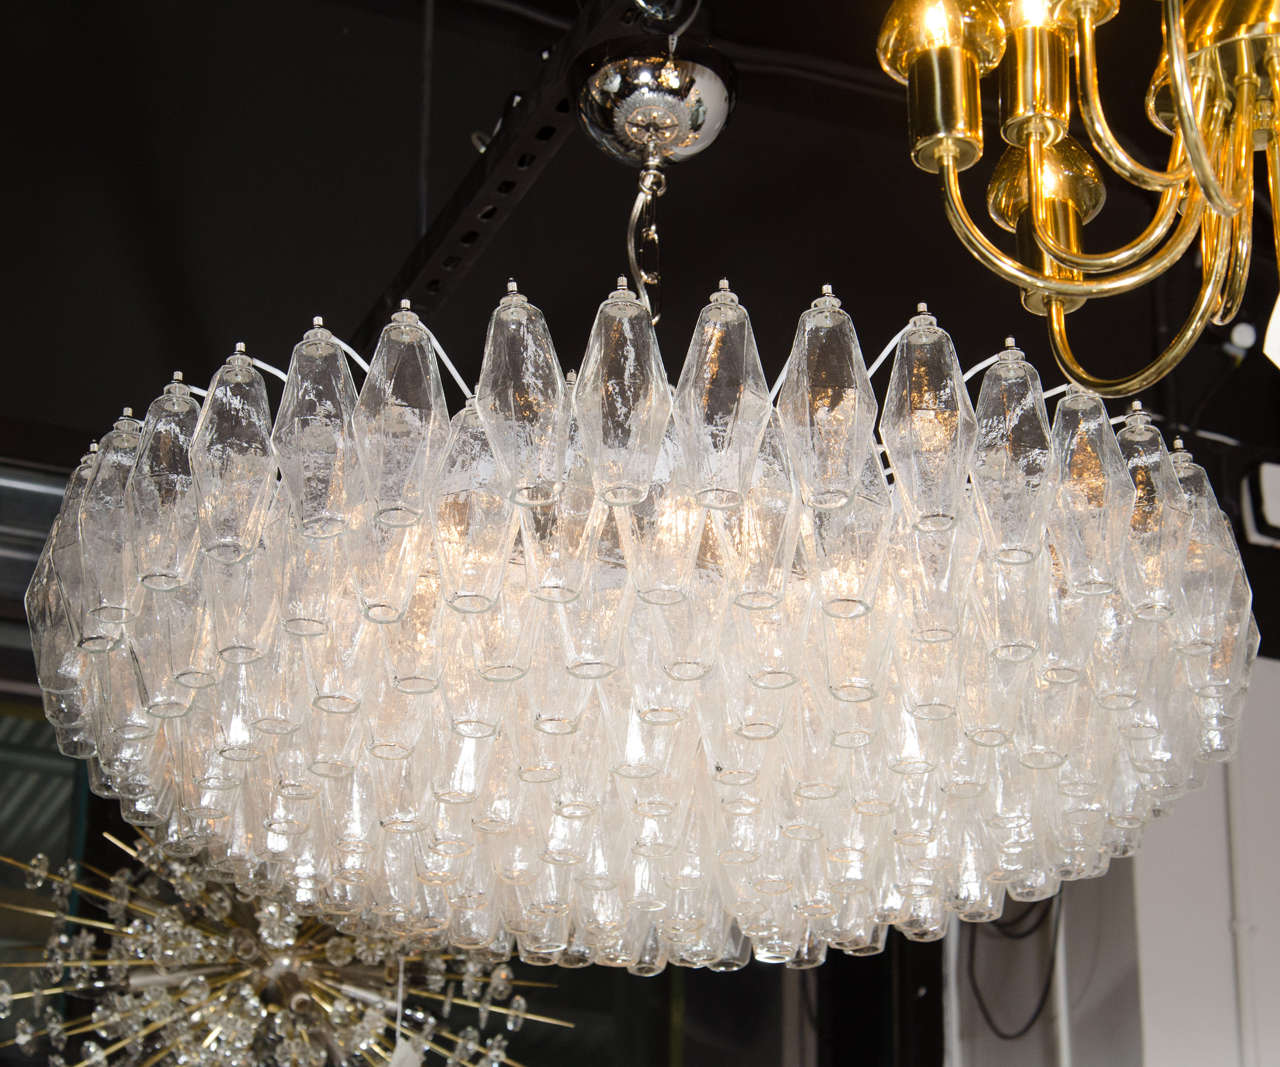 This stunning modernist chandelier features an abundance of translucent handblown Murano glass polyhedral shades suspended from a chrome frame. The frame features a gradual upward graduation from its center. It has six Edison base bulbs, providing